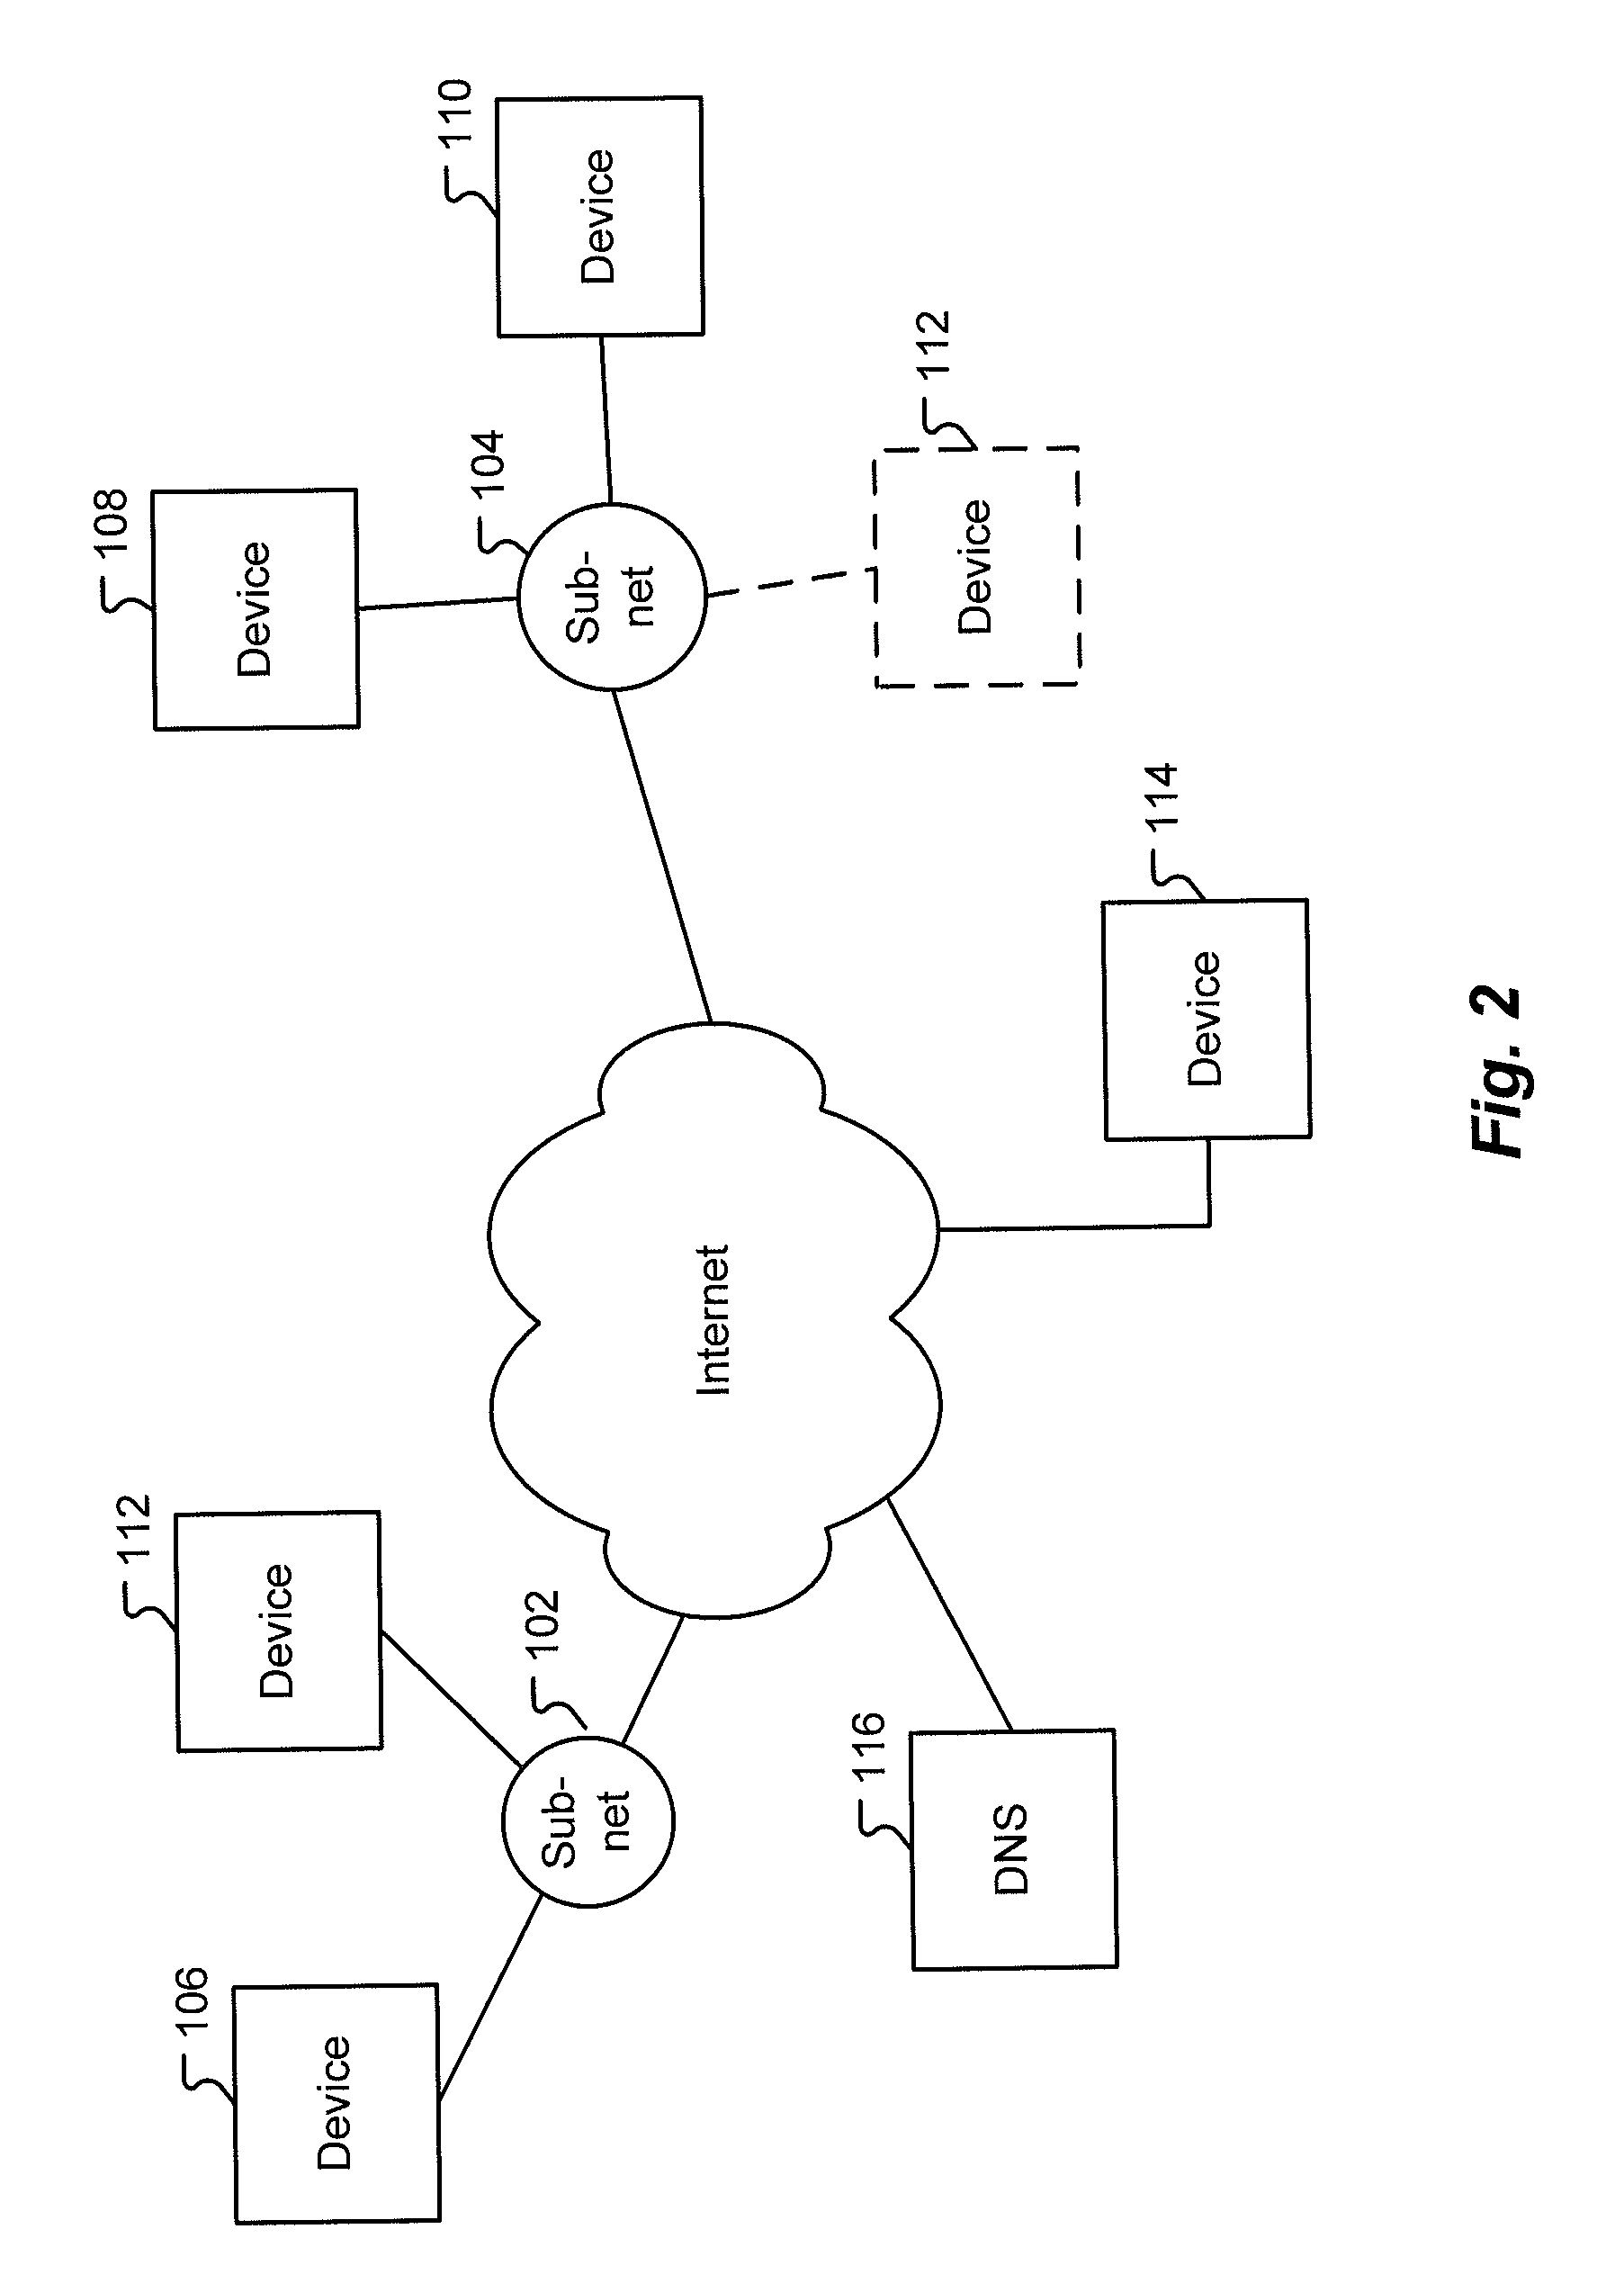 System and method for virtual server migration across networks using DNS and route triangulation